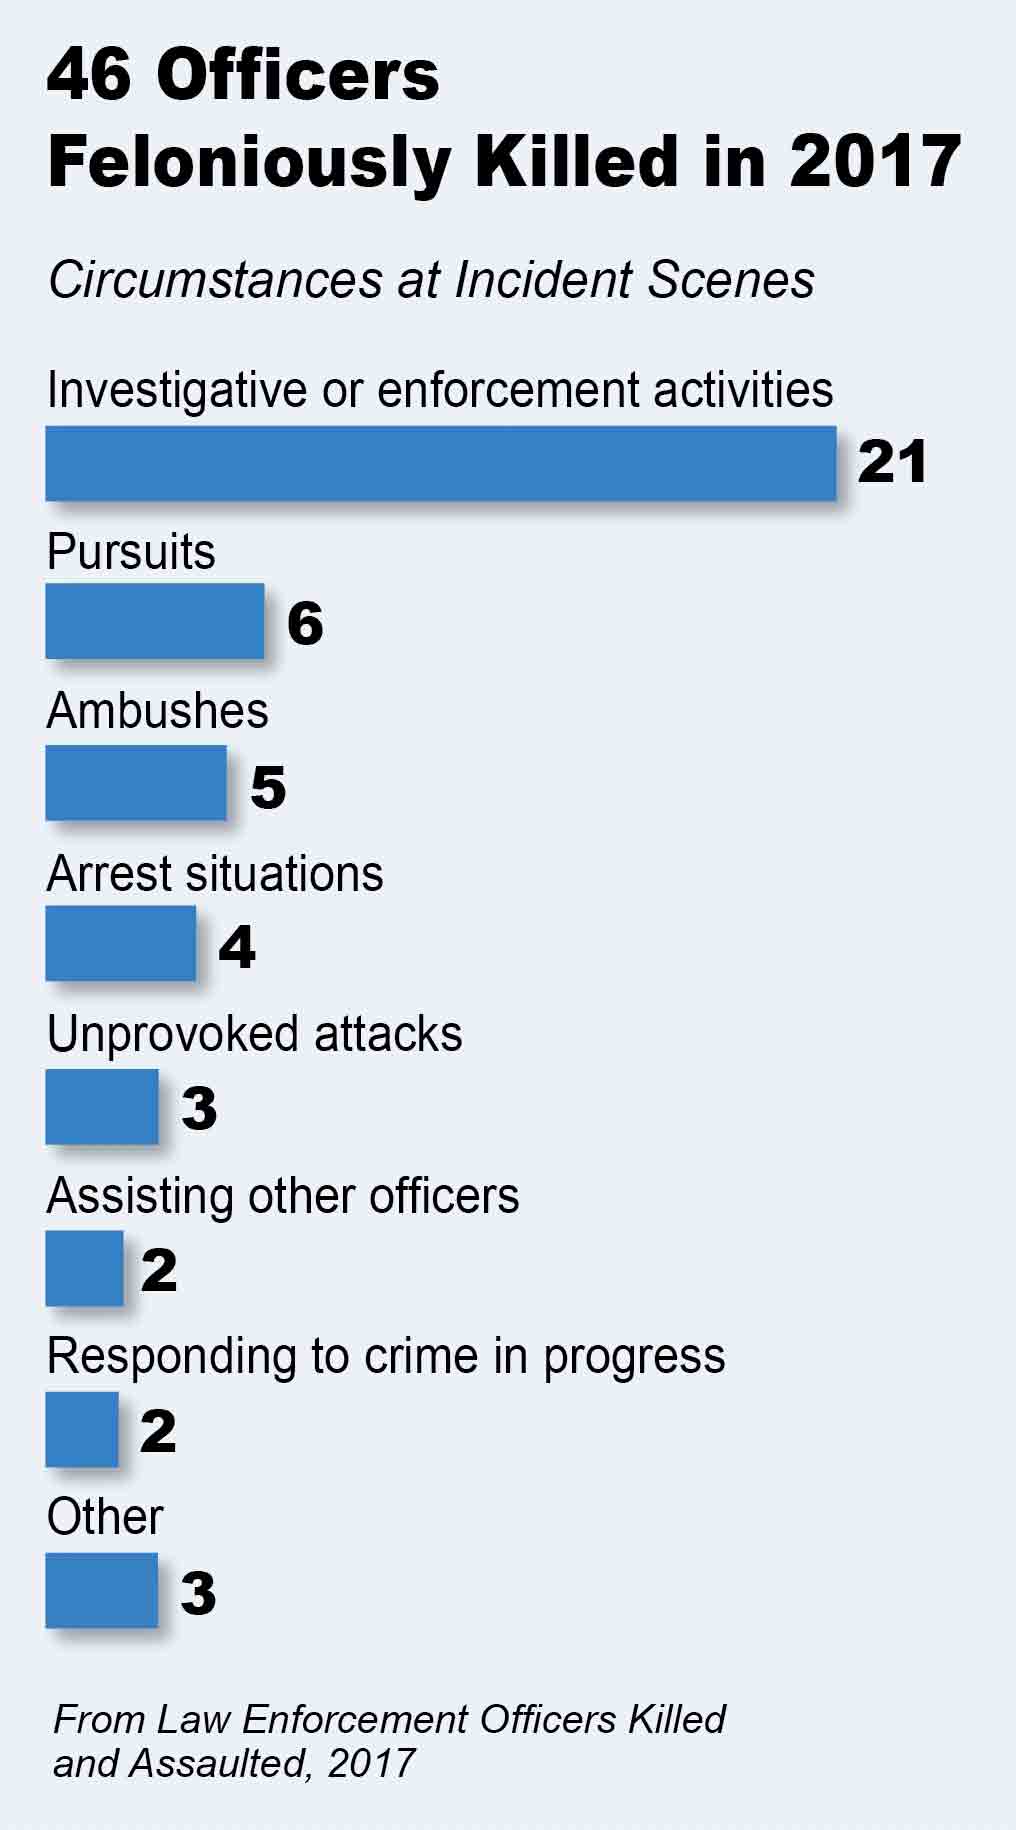 Bar chart depicting the circumstances in which officers were feloniously killed in 2017, according to statistics from the FBIâs Law Enforcement Officers Killed and Assaulted, 2017 report.